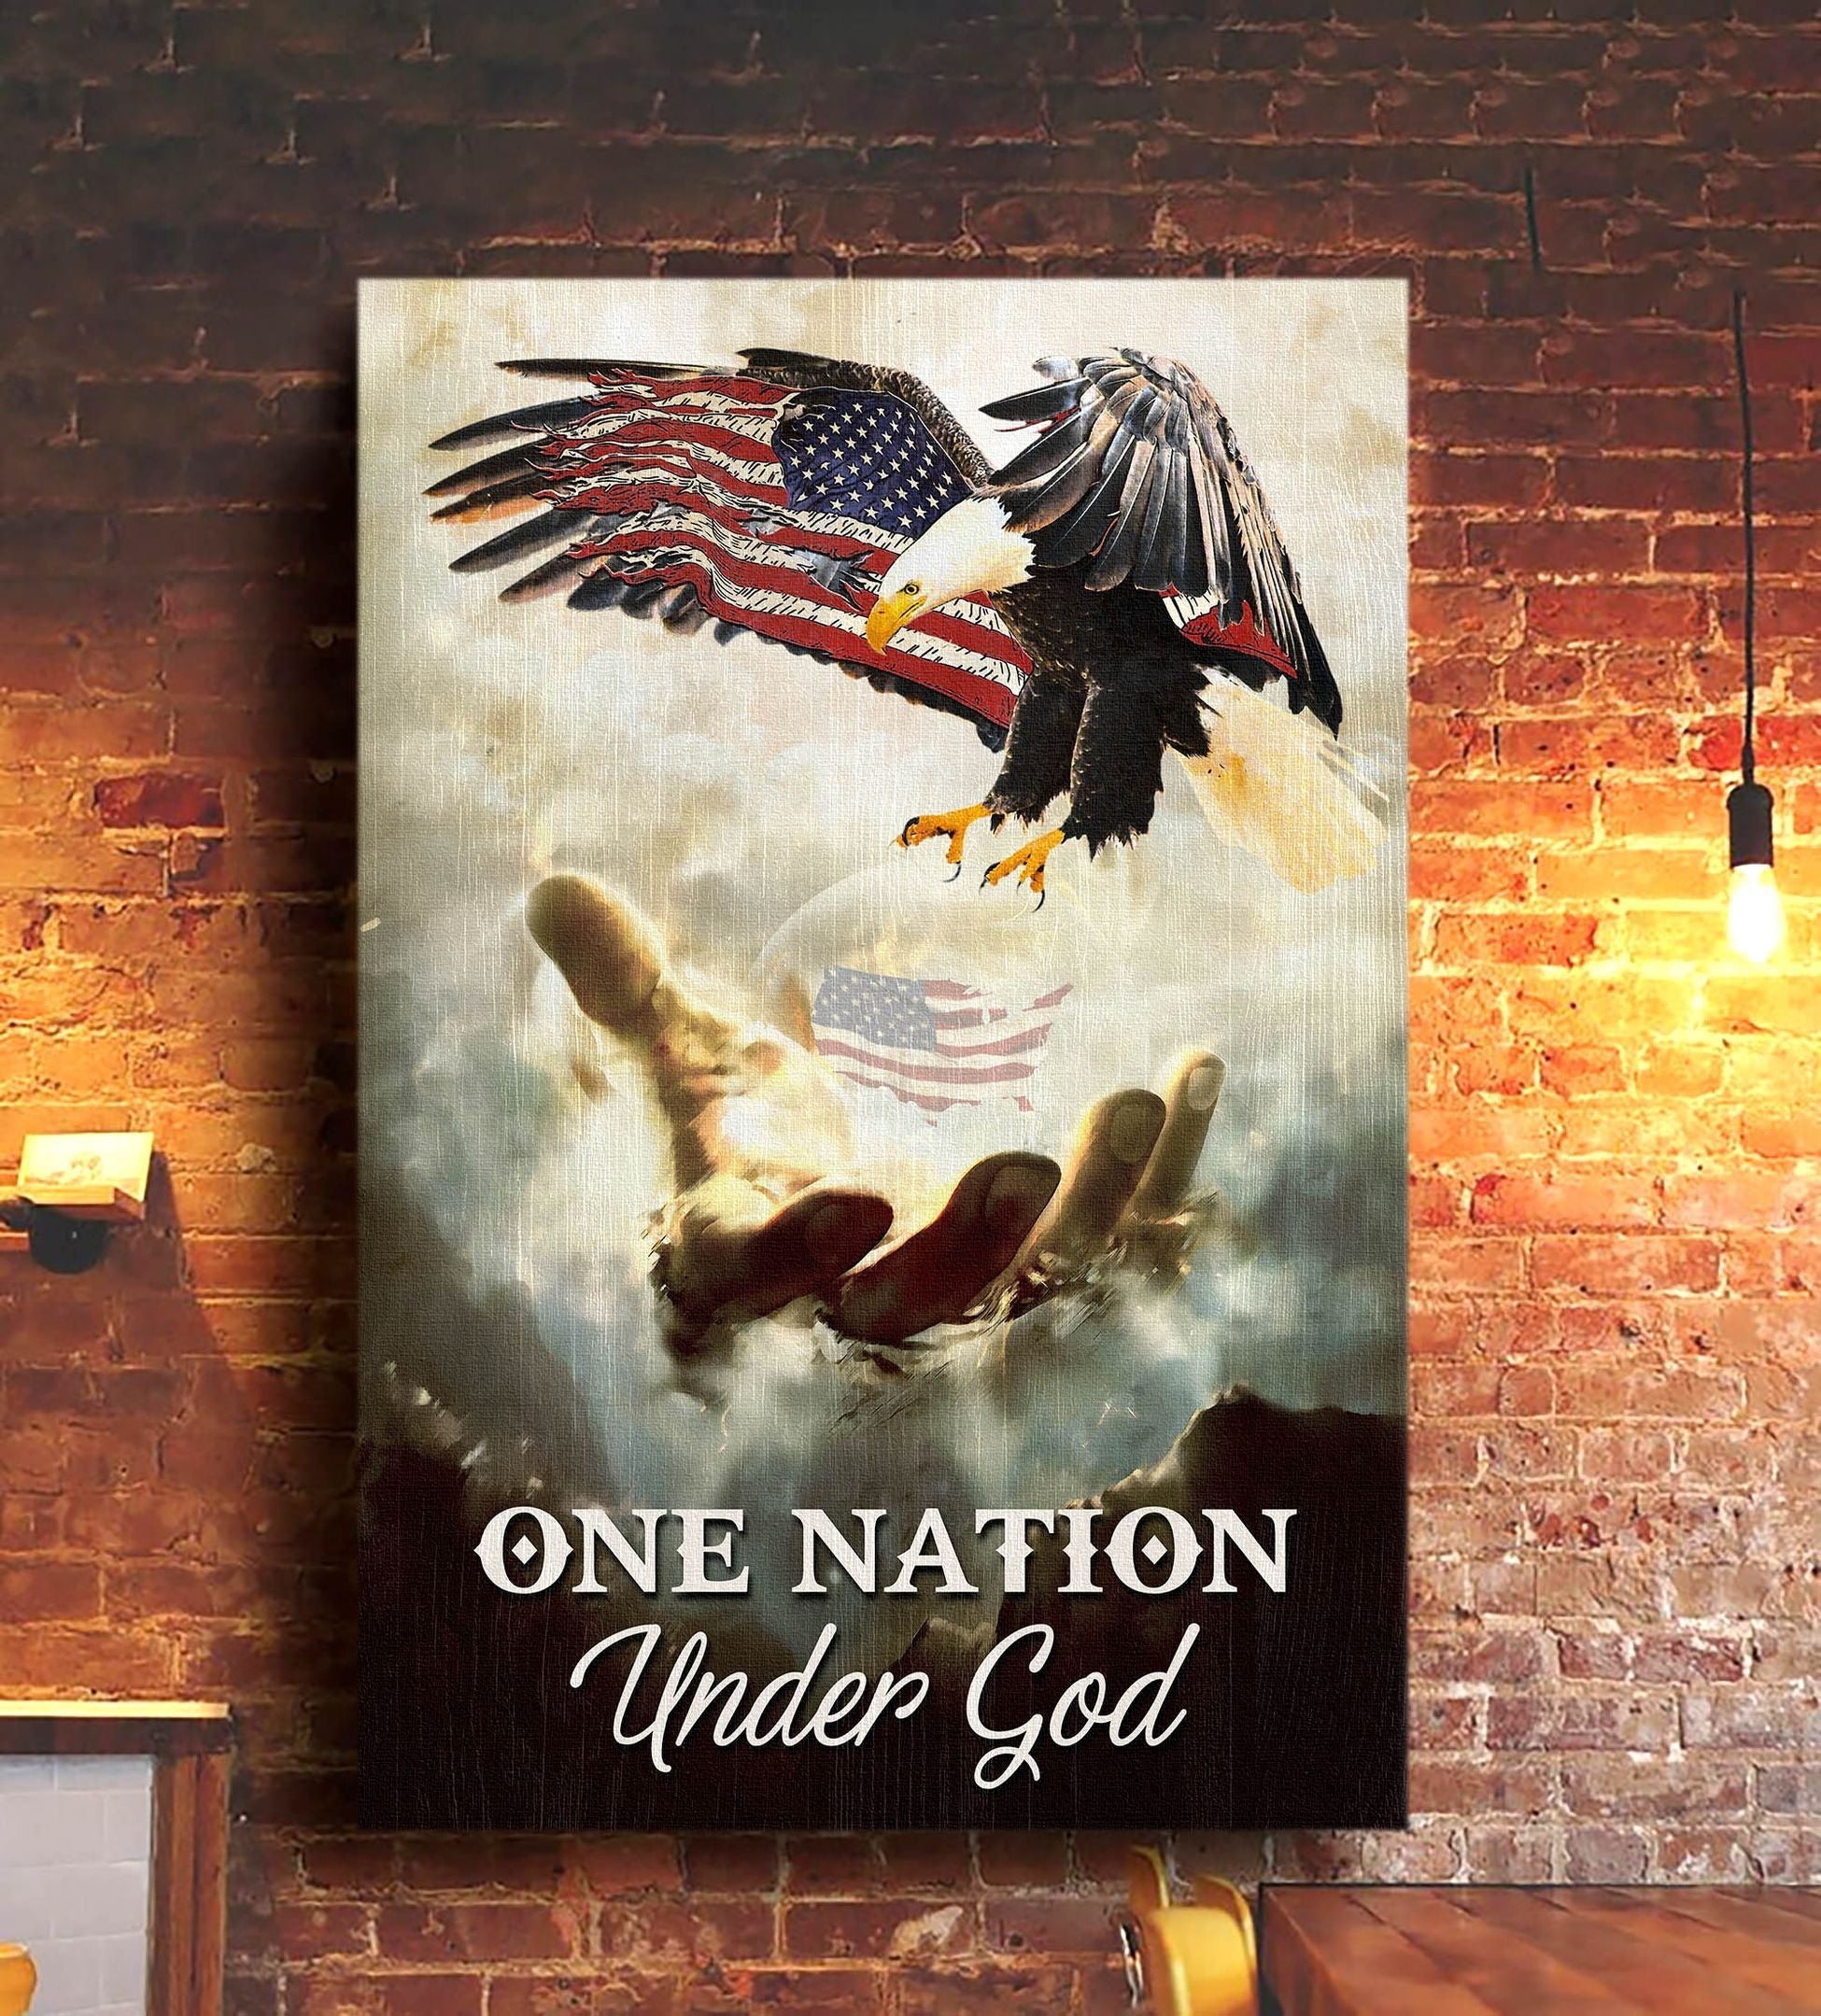 Jesus and Eagle One nation under amazing God Canvas And Poster, Wall Decor Visual Art